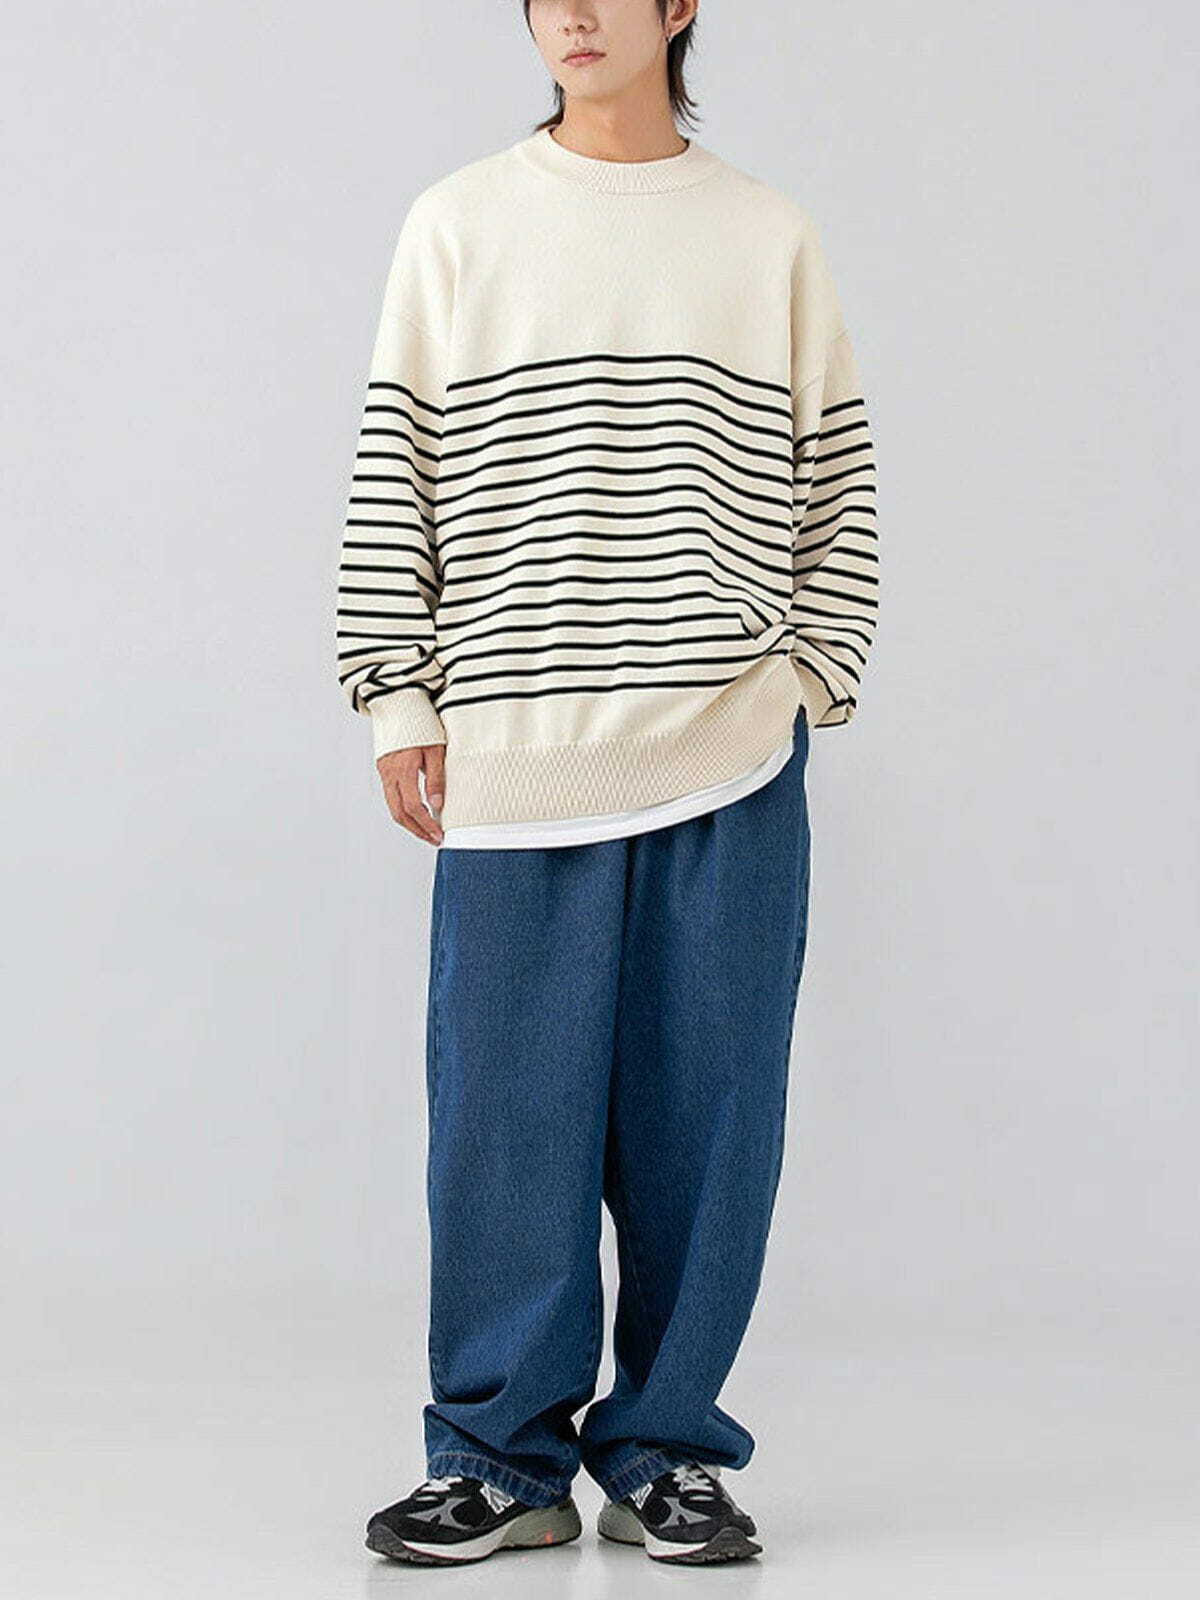 retro striped knit sweater vibrant & timeless style 8991